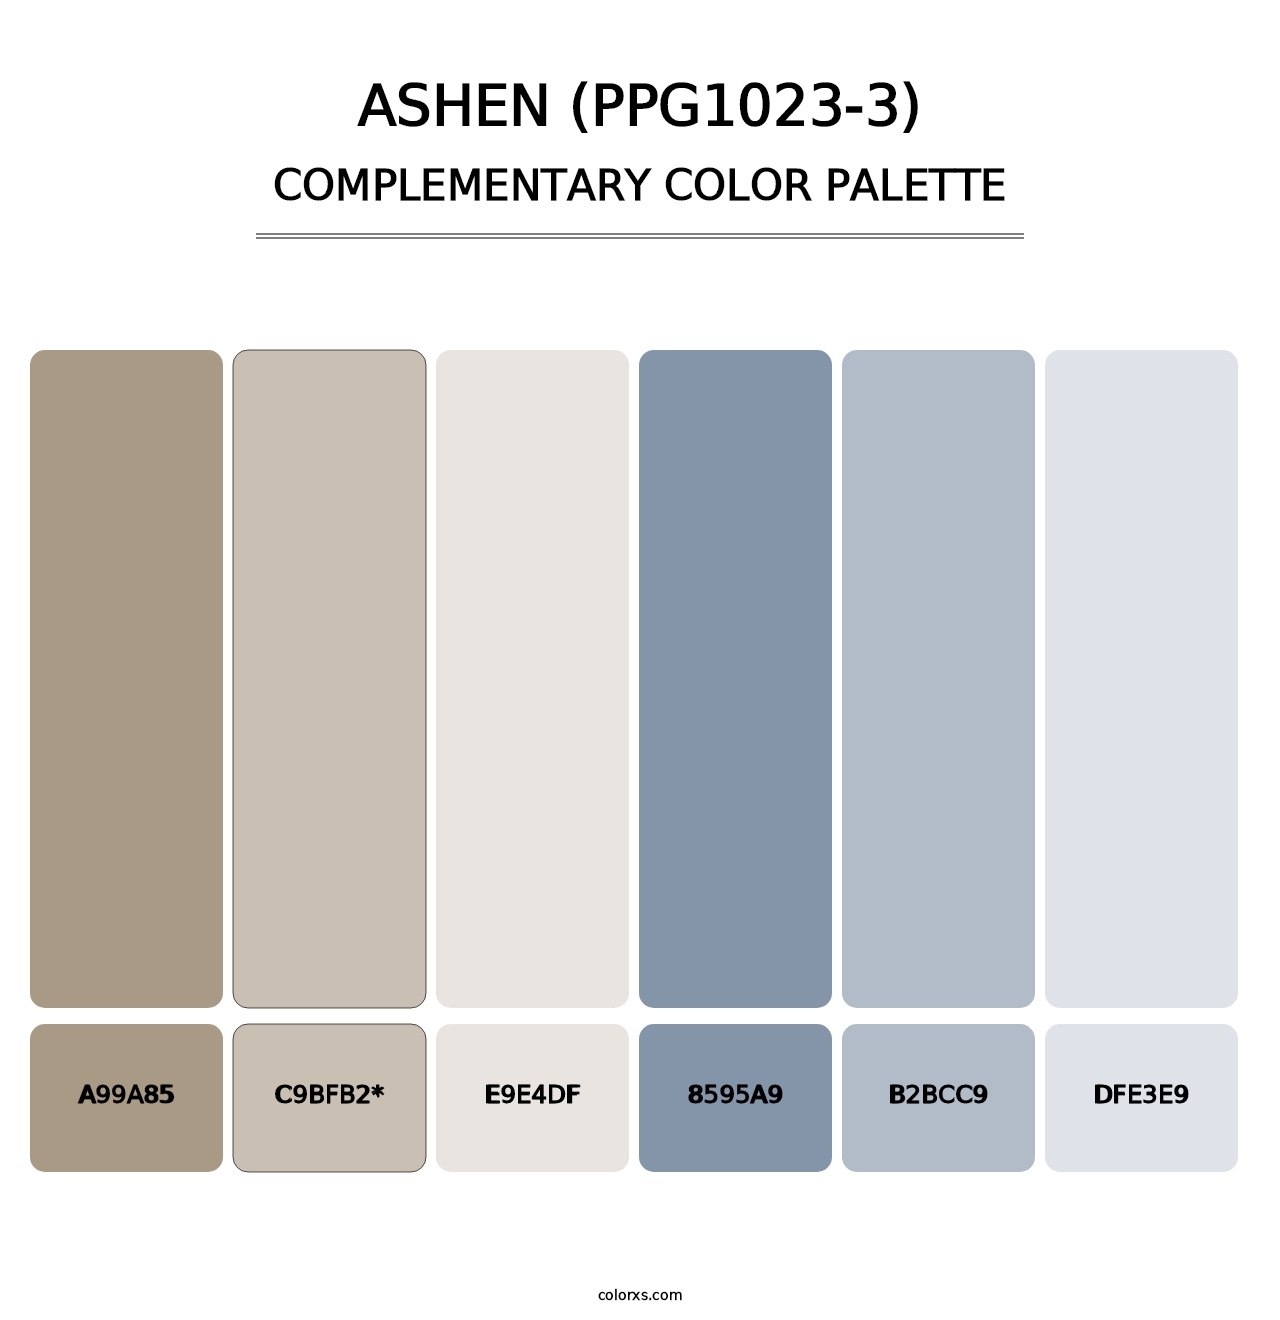 Ashen (PPG1023-3) - Complementary Color Palette